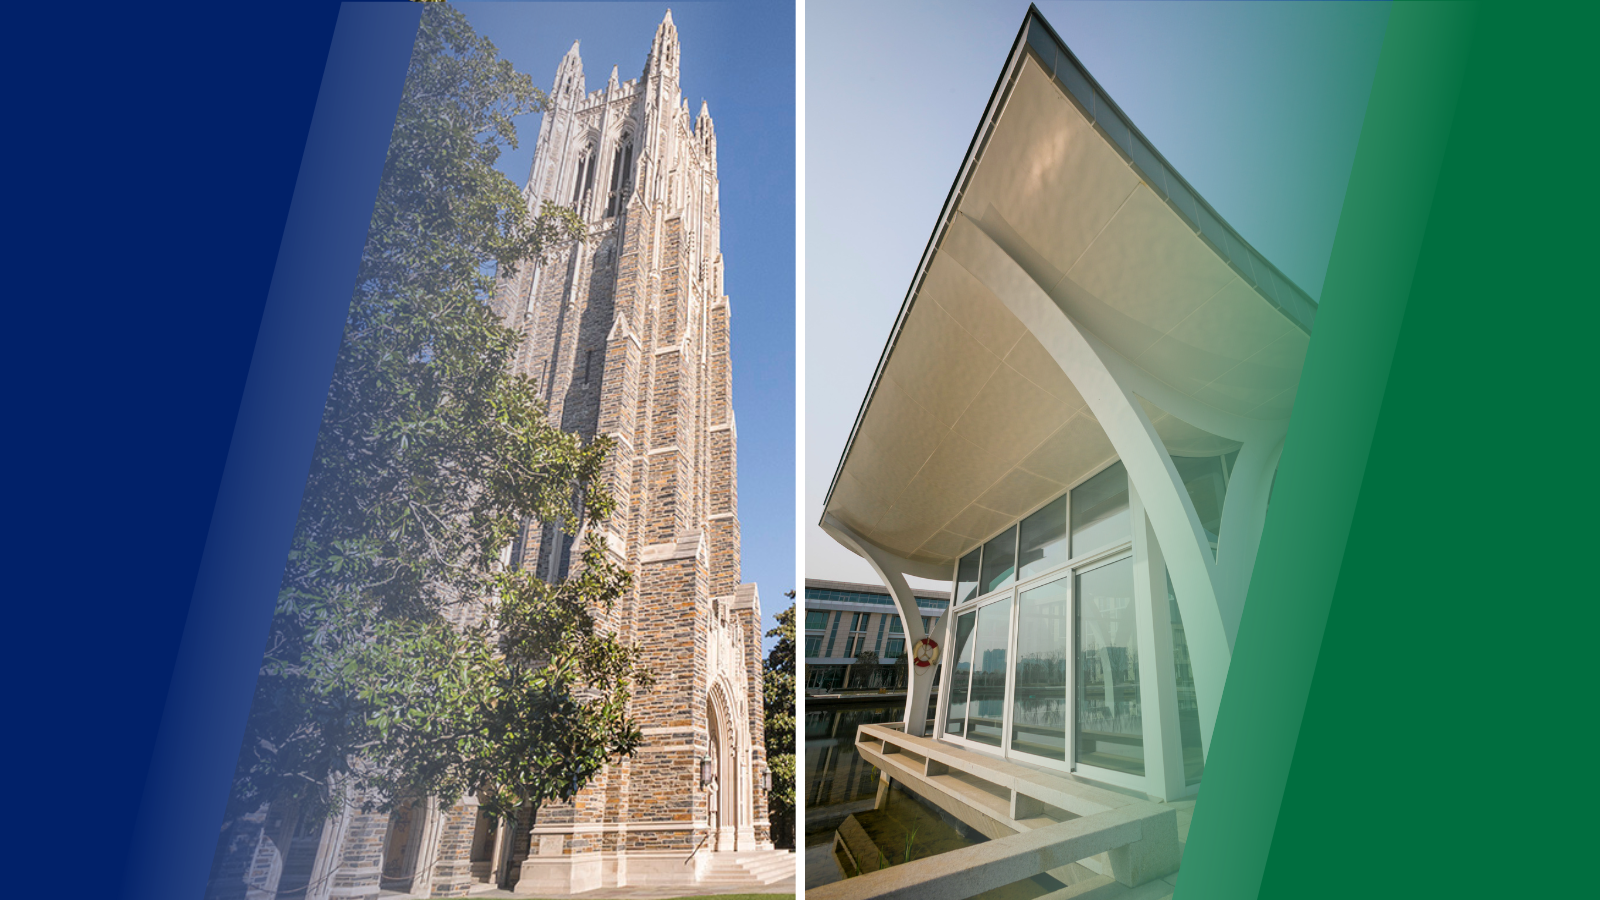 Exterior view of Duke University chapel next to an exterior view of a building on Duke Kunshan University's campus.